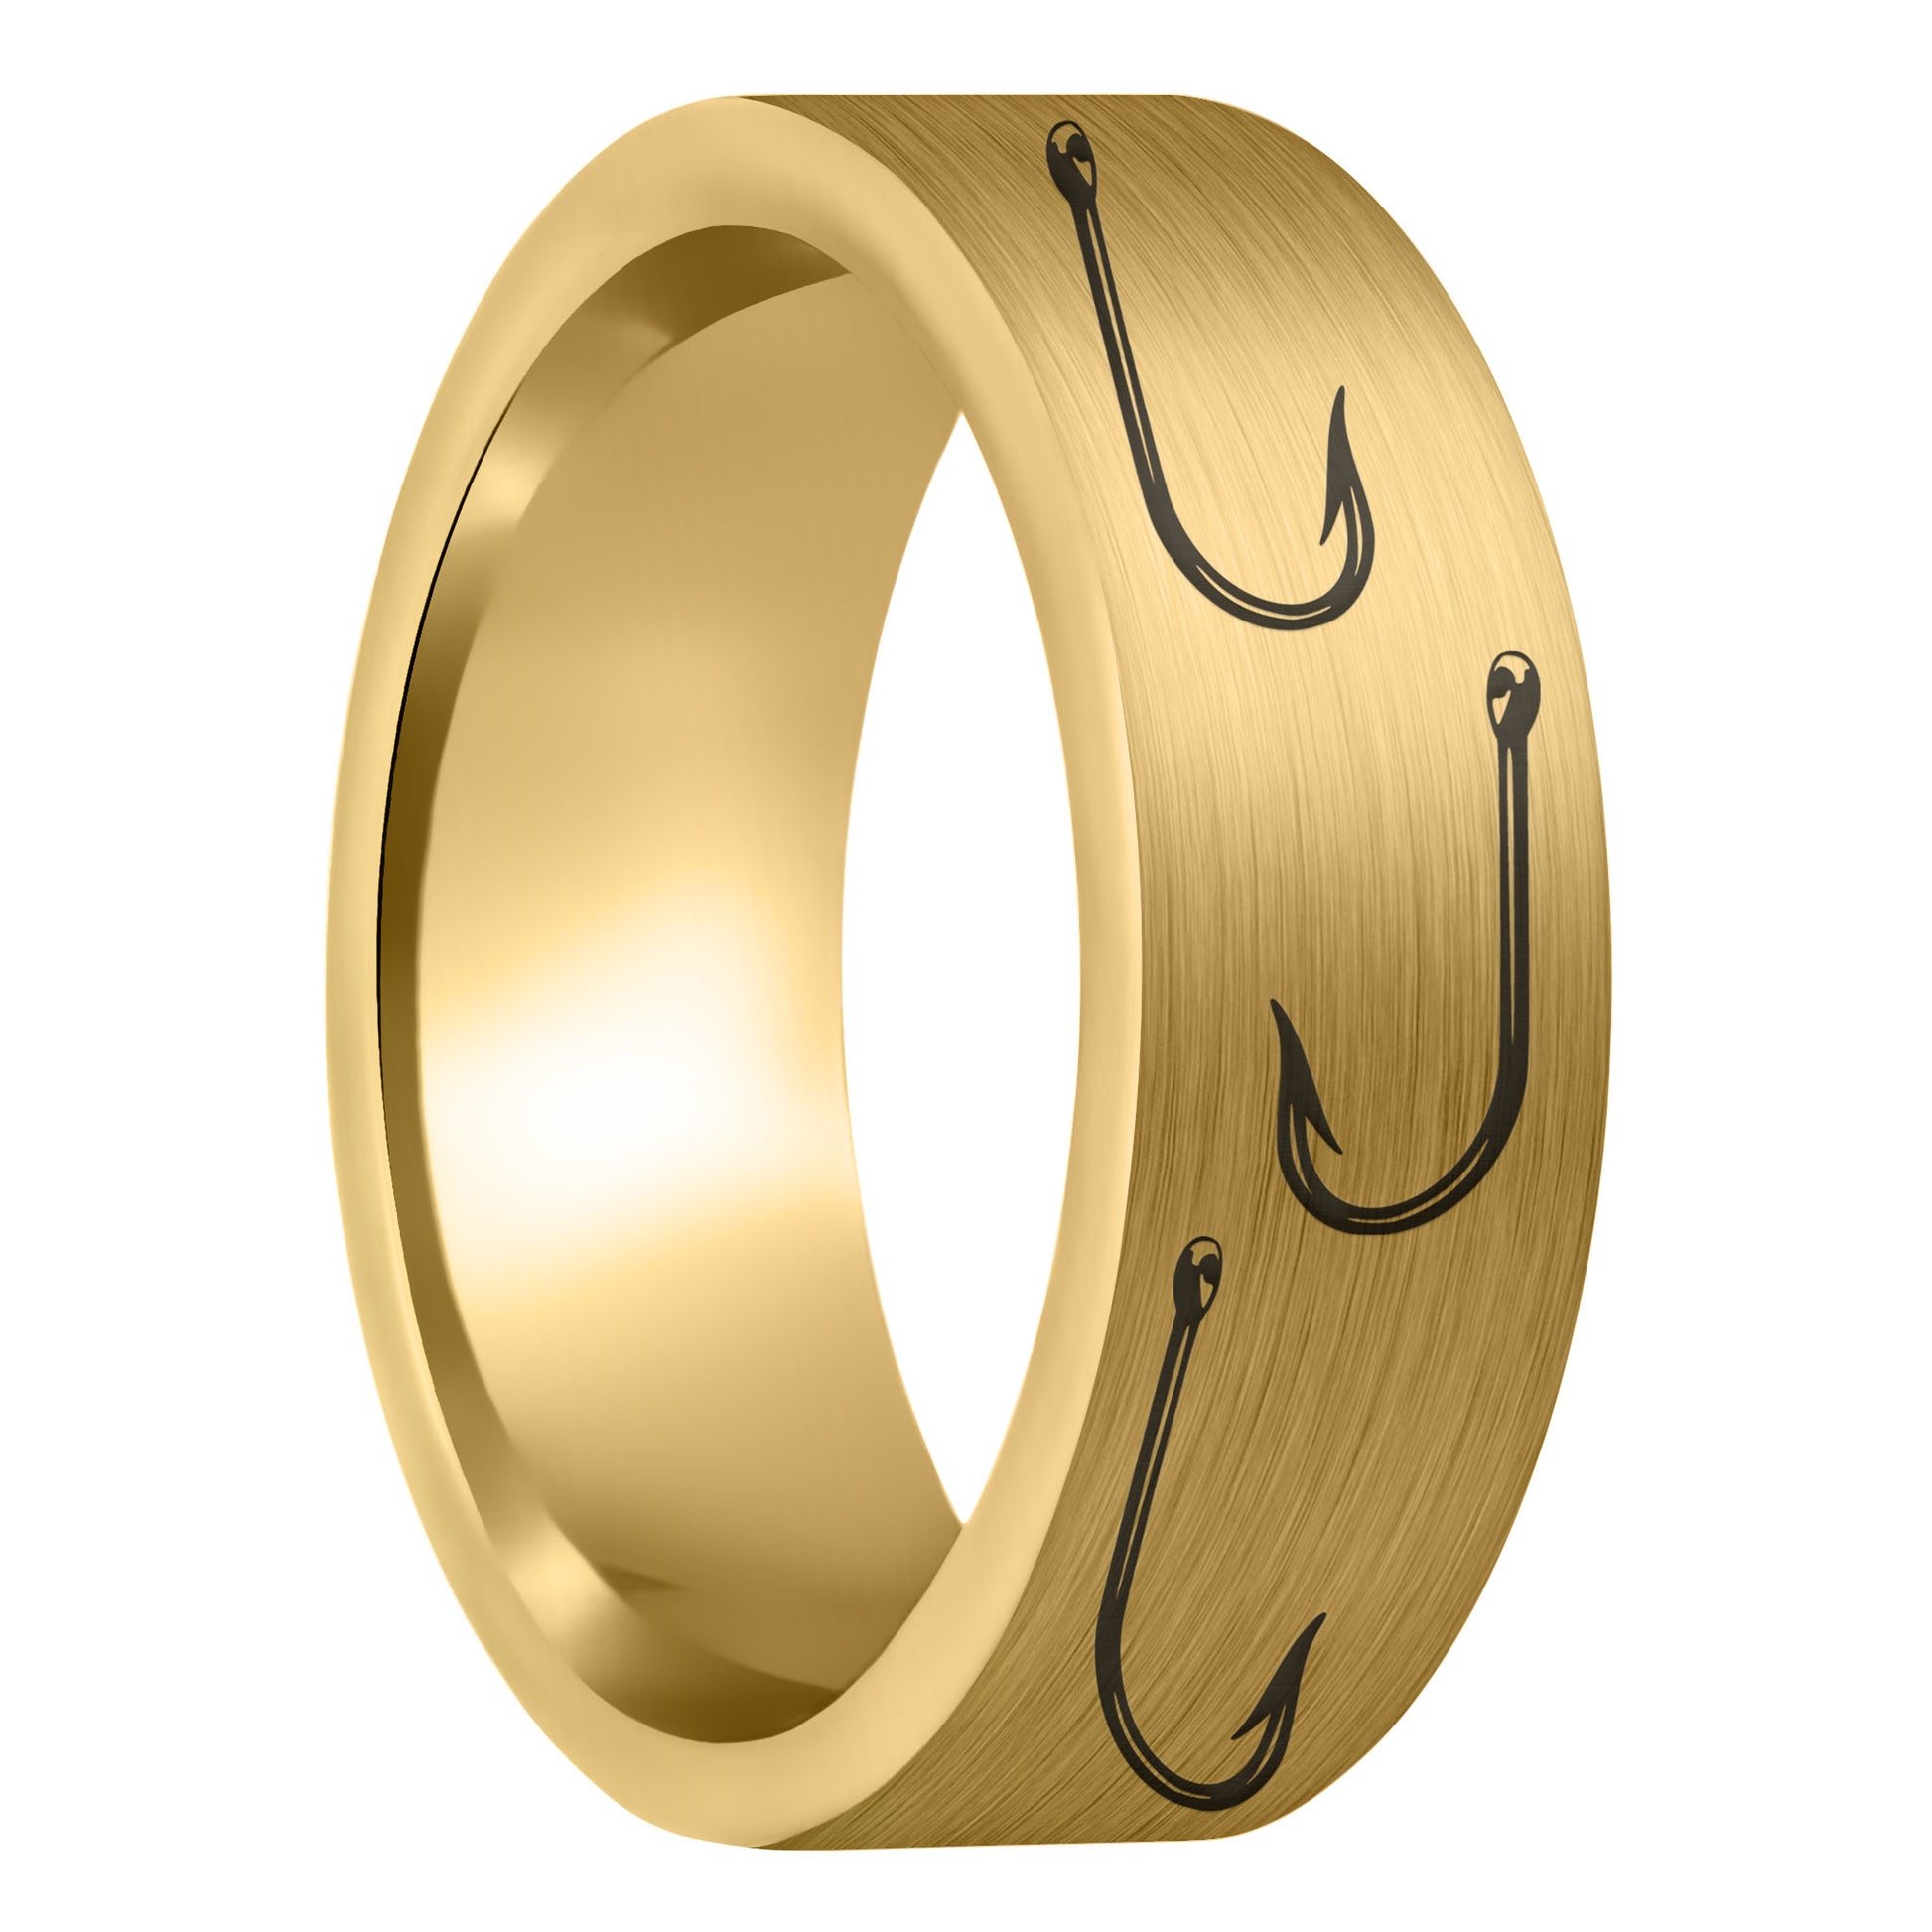 A fishing hook brushed gold tungsten men's wedding band displayed on a plain white background.